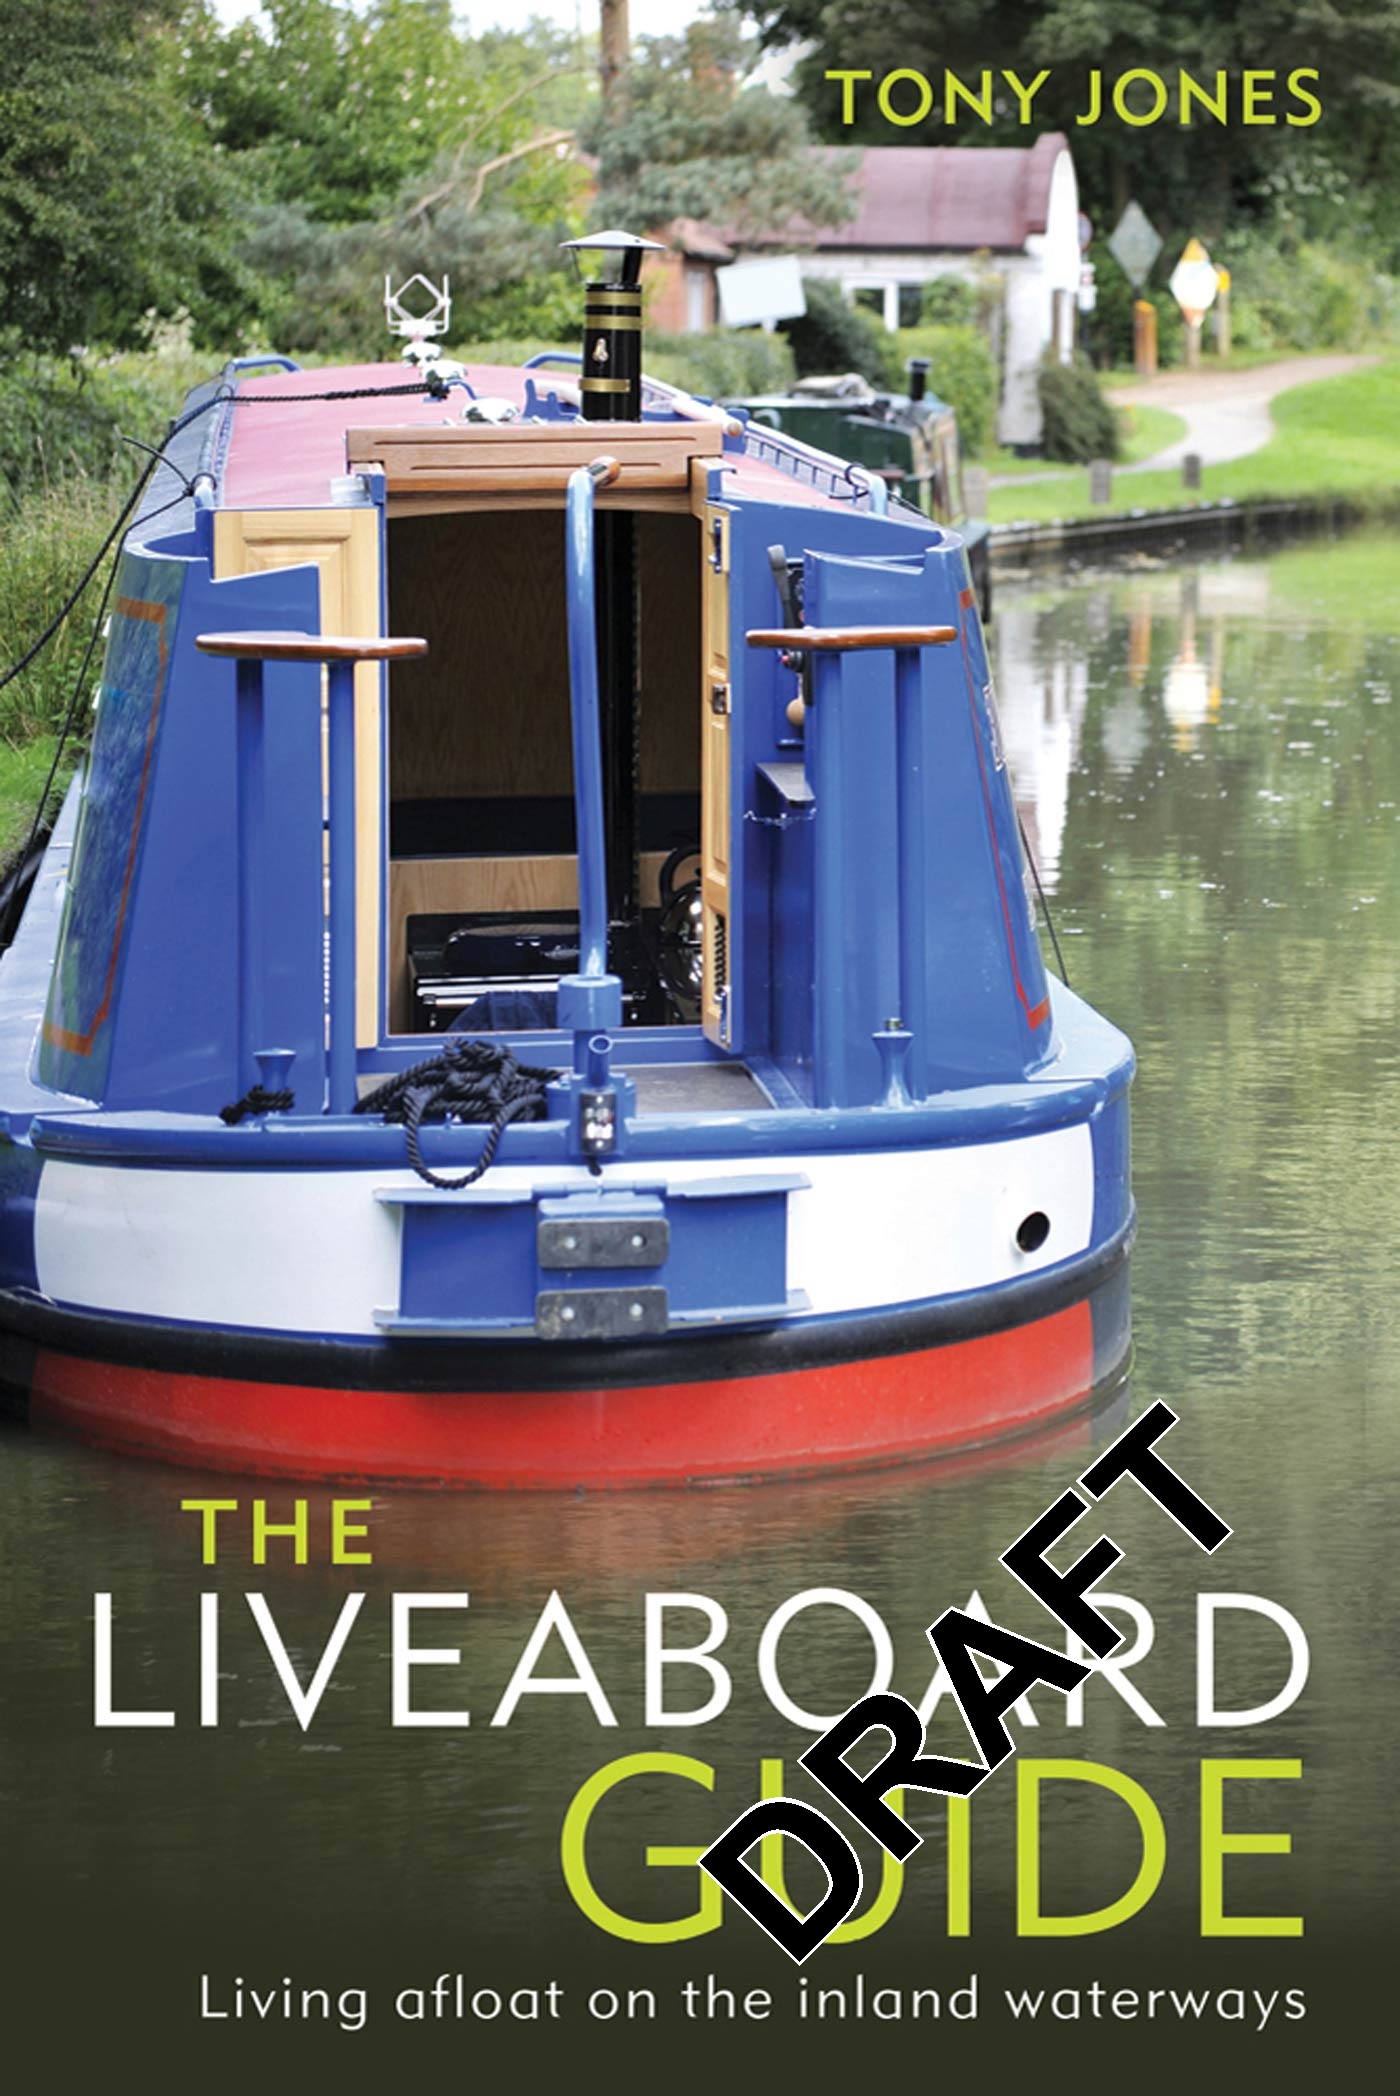 The Liveaboard Guide : Living Afloat on the Inland Waterways (Paperback) - image 1 of 1